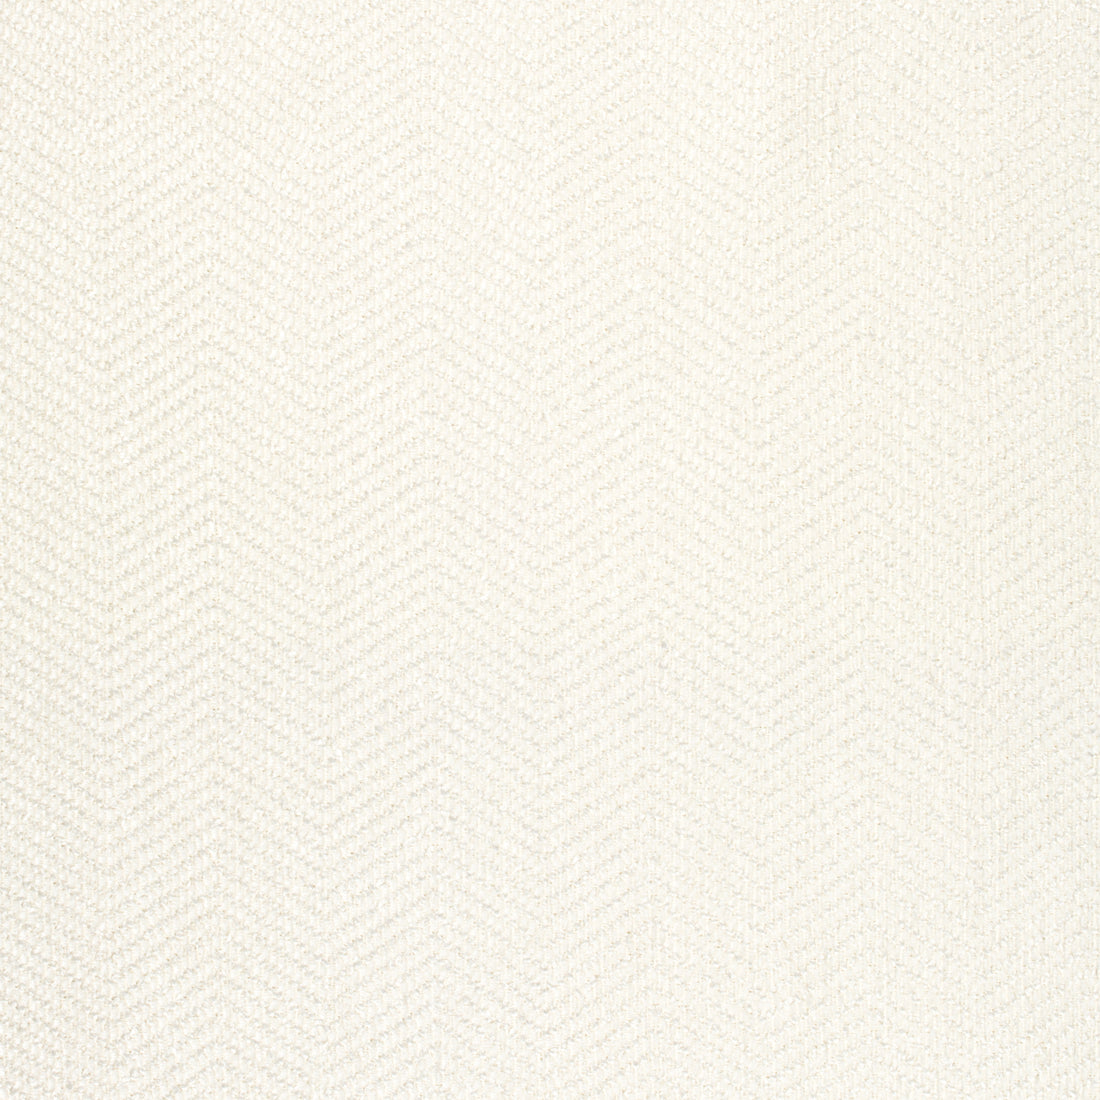 Dalton Herringbone fabric in snow white color - pattern number W80620 - by Thibaut in the Pinnacle collection